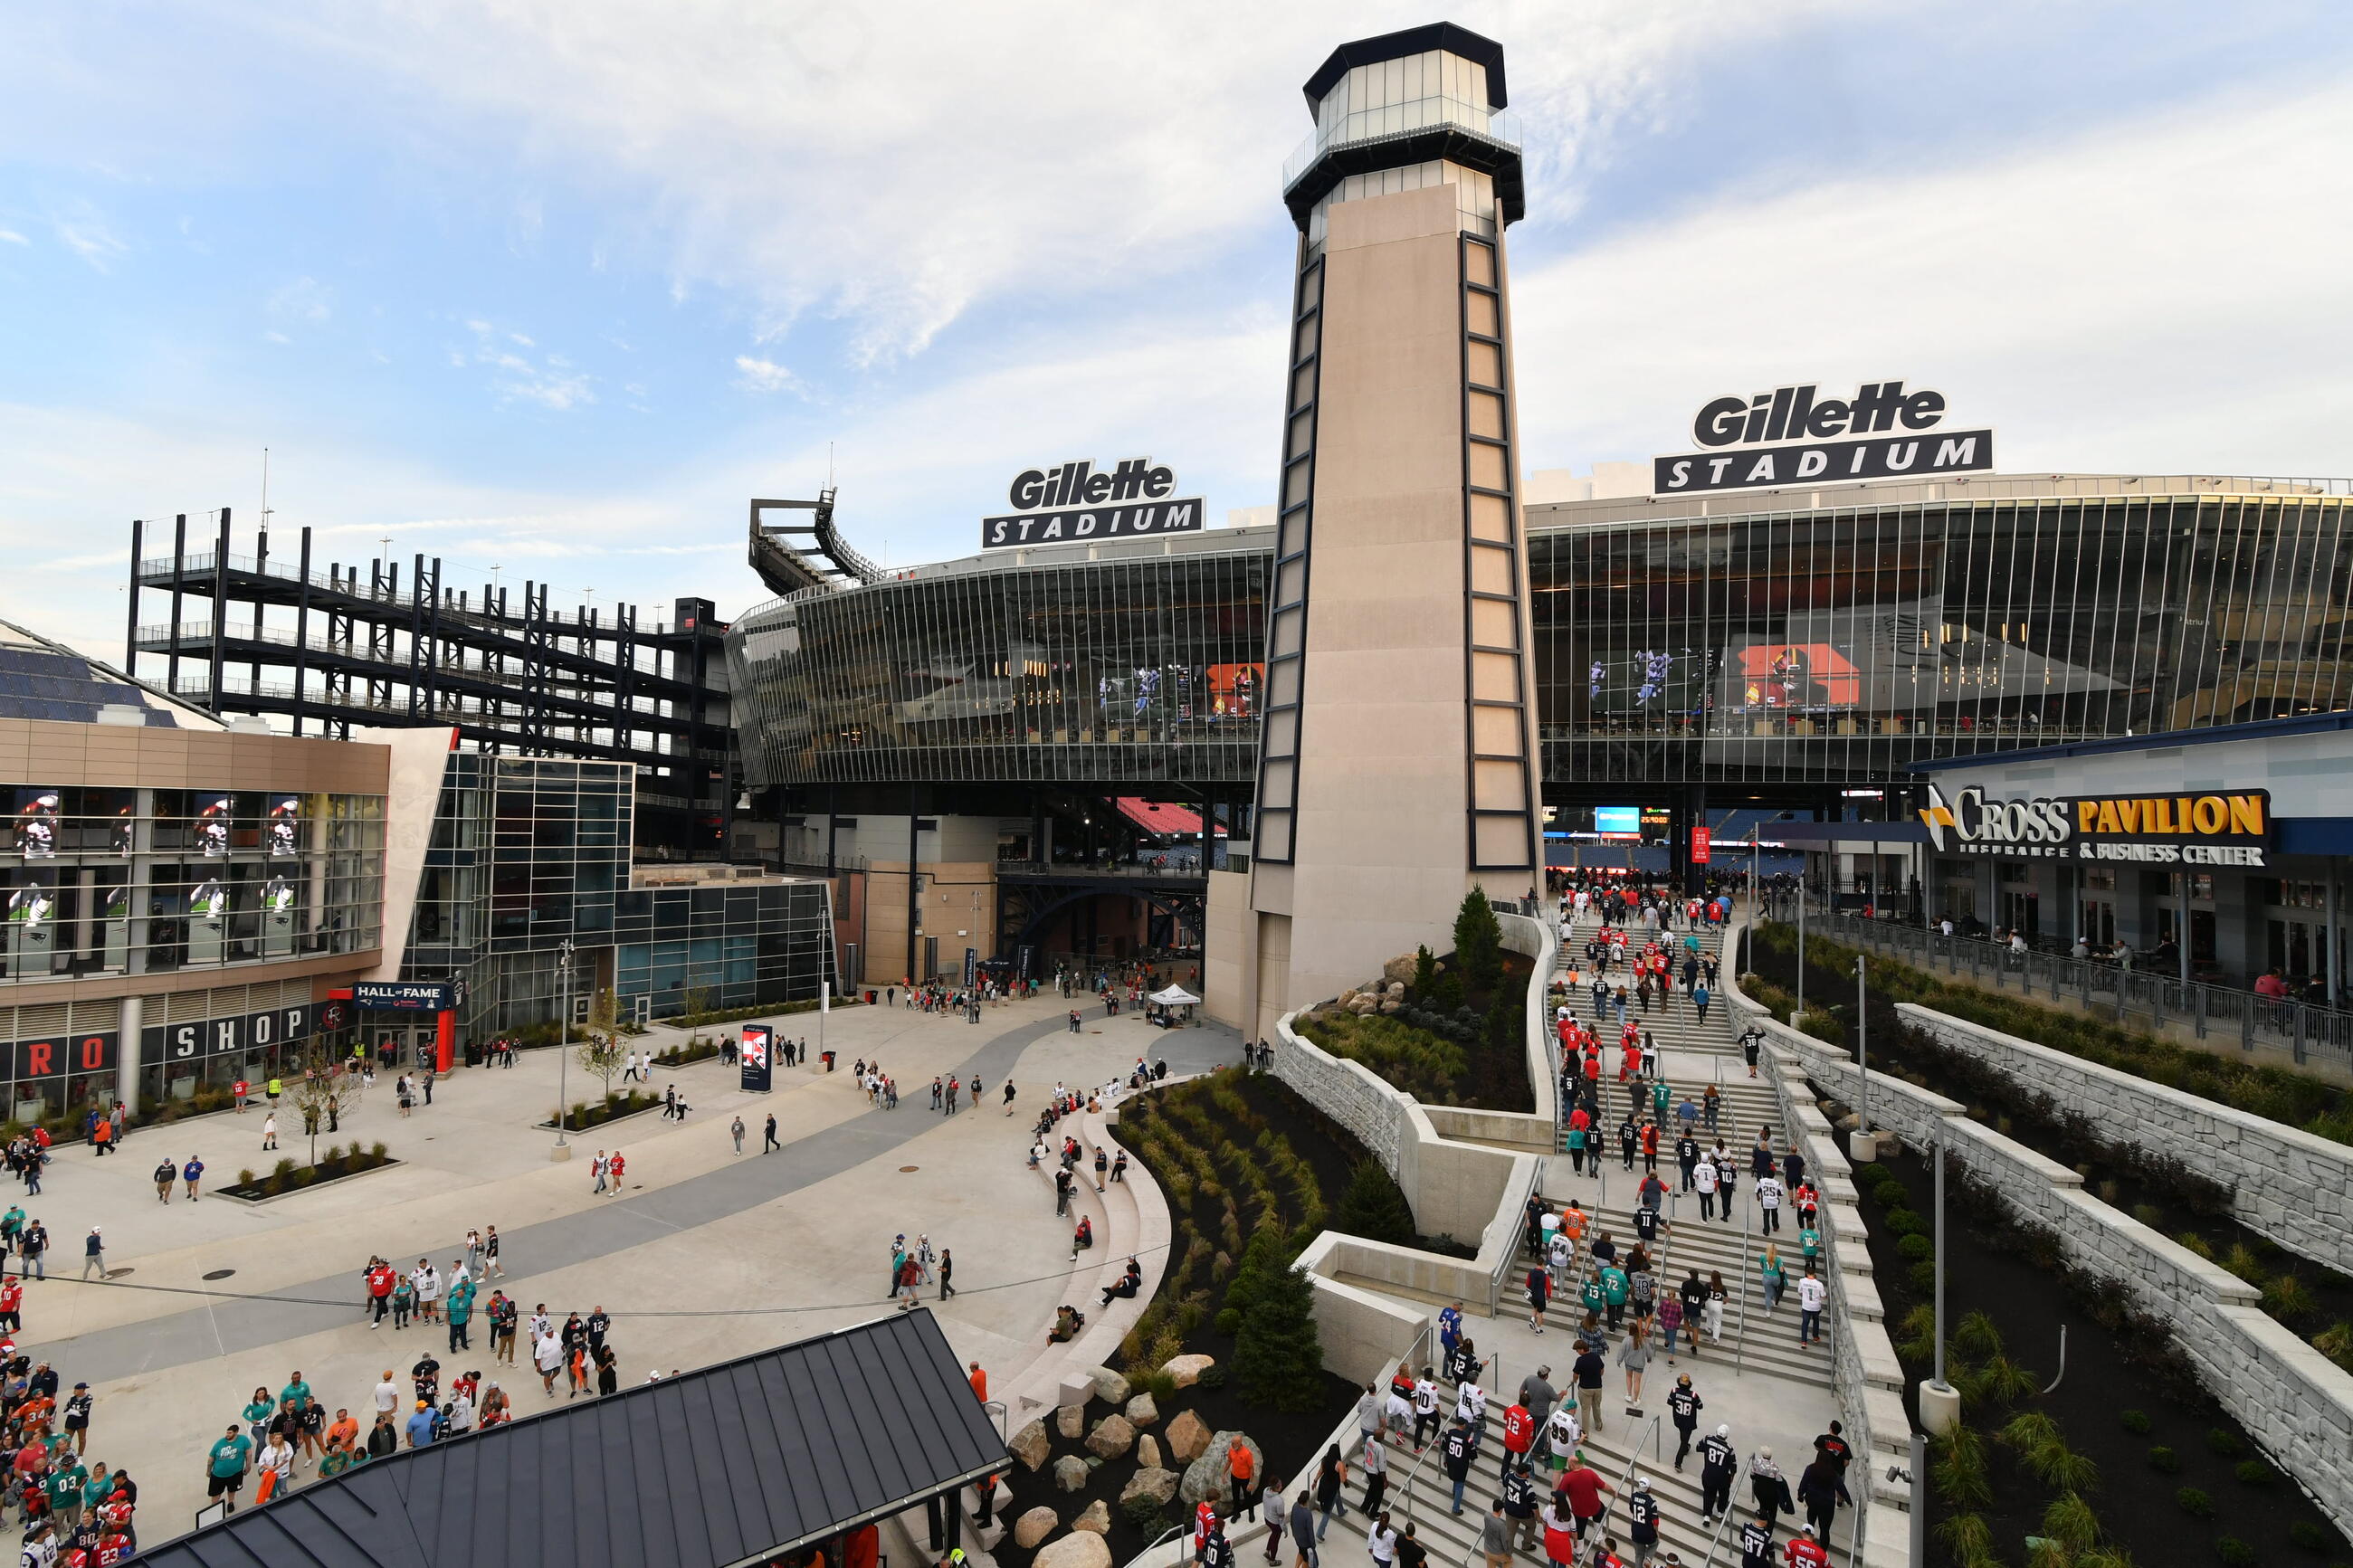 a view of gillette stadium from the outside with lots of people walking on the stairs and in the open plaza area